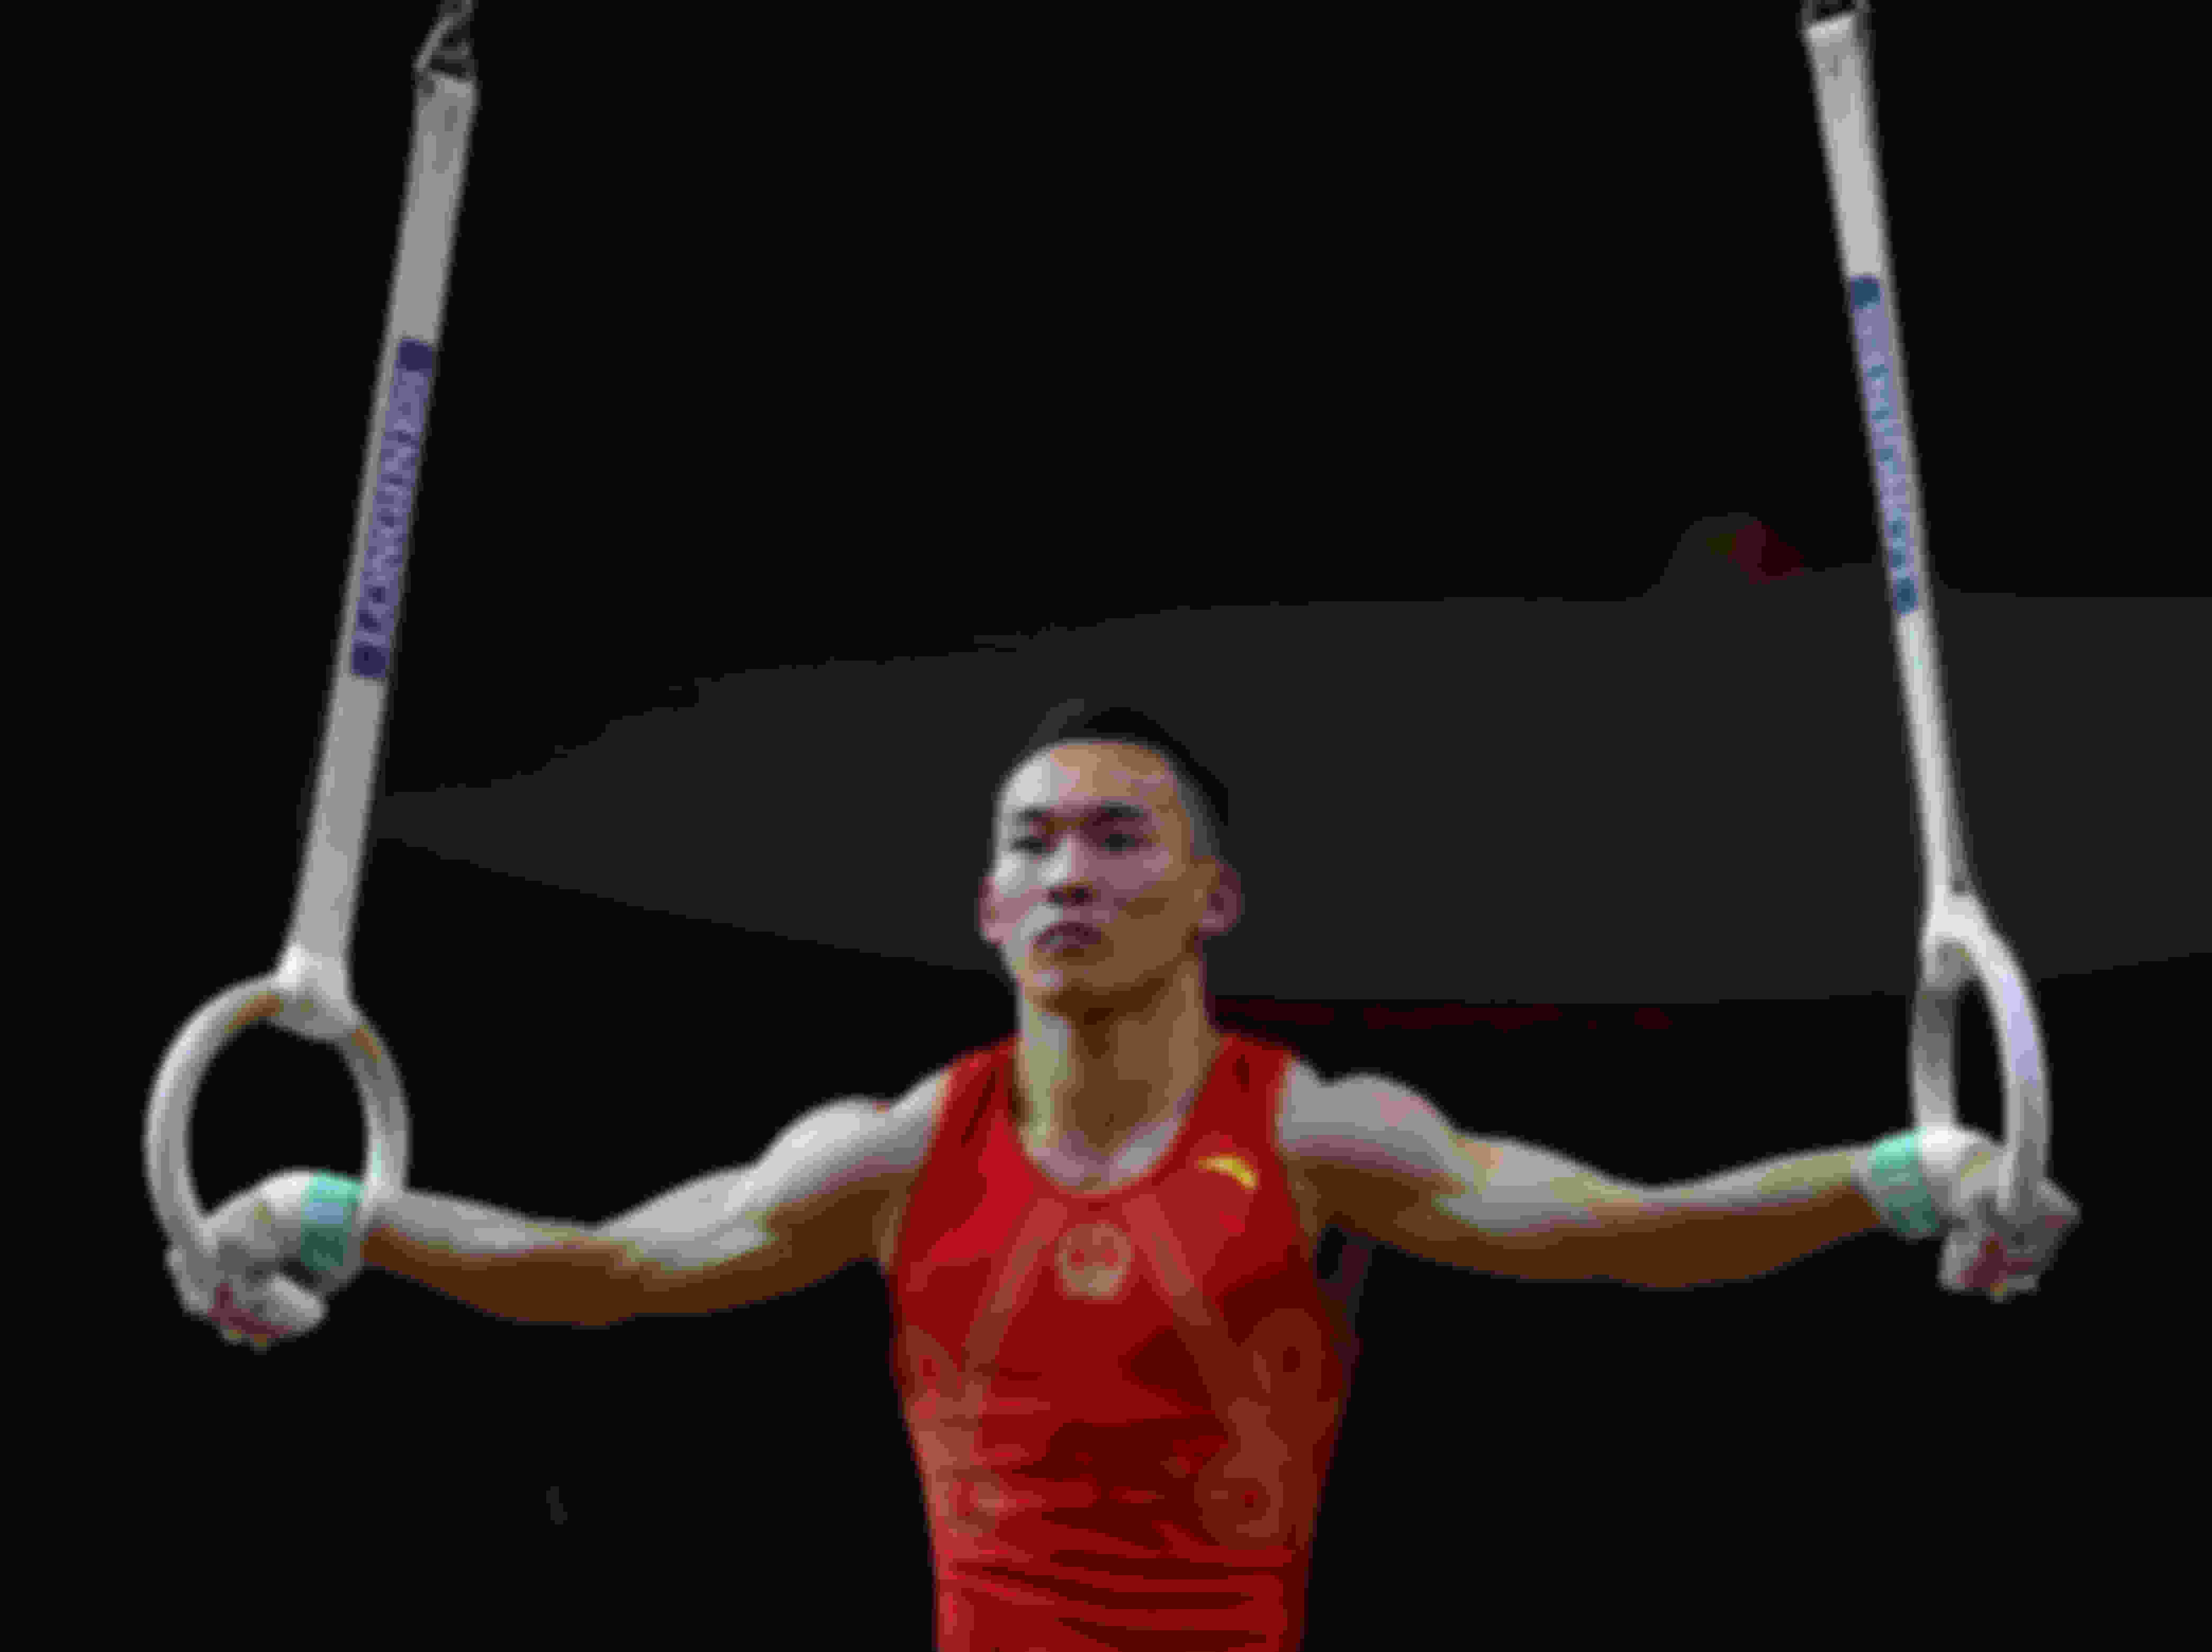 Defending champion Xiao Ruoteng scores 14.333 on the rings on his way to all-around silver in Doha